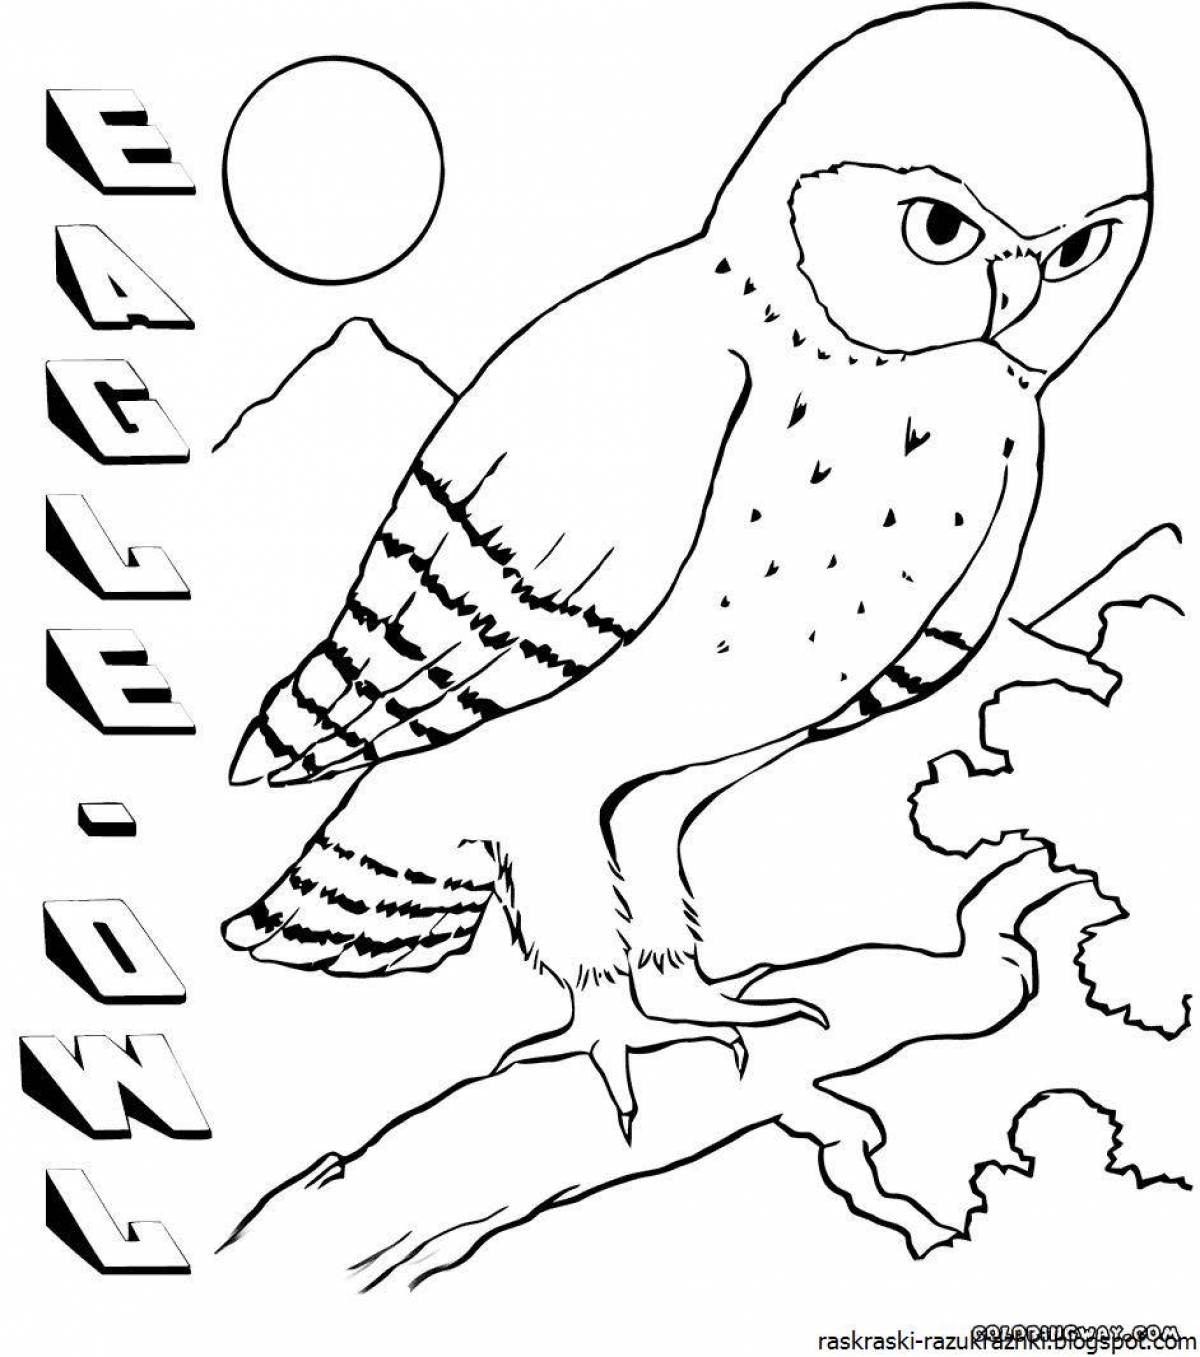 Fantastic coloring book of wintering birds for children 3-4 years old